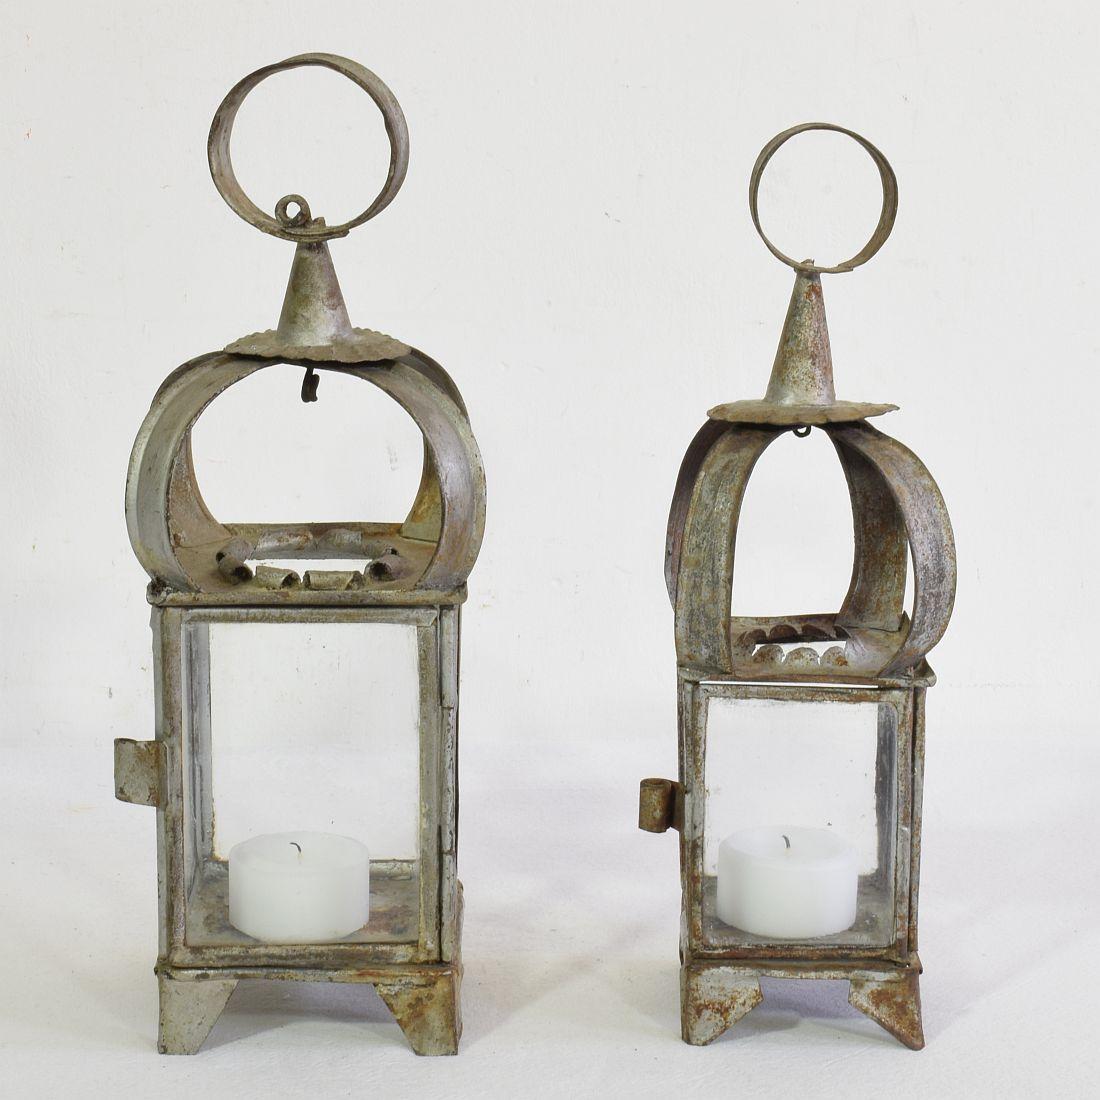 Beautiful and rare pair of metal lanterns, Italy, circa 1850-1900.
Weathered and small old repairs 
Measures: H:24-26cm W:8,5-10cm
Measurement here below of the largest lantern.